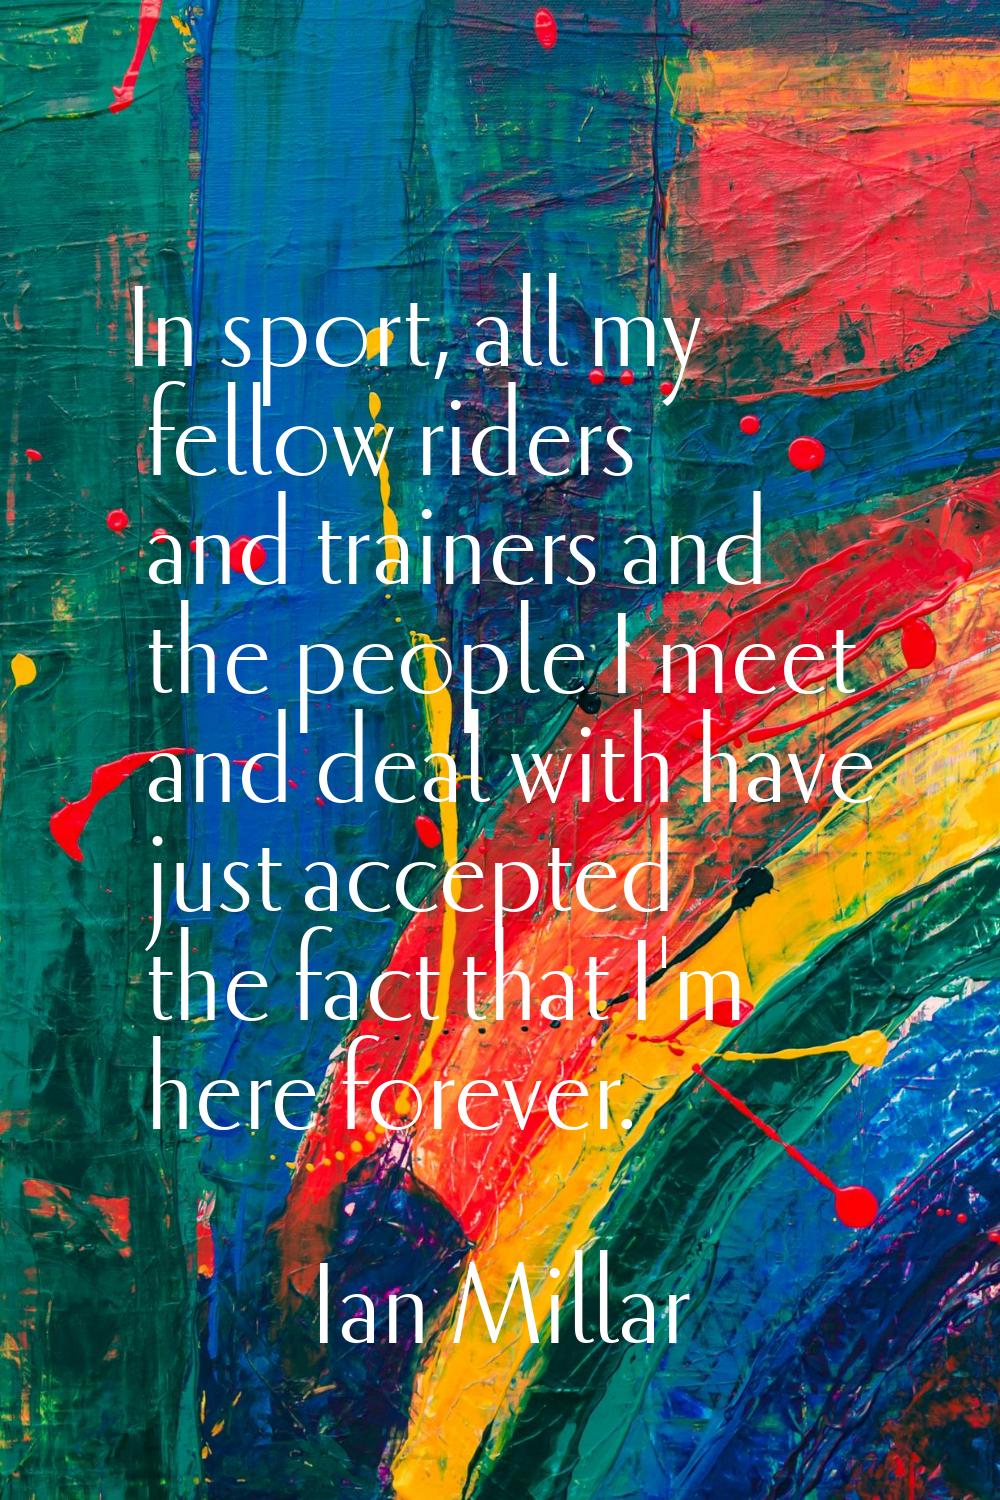 In sport, all my fellow riders and trainers and the people I meet and deal with have just accepted 